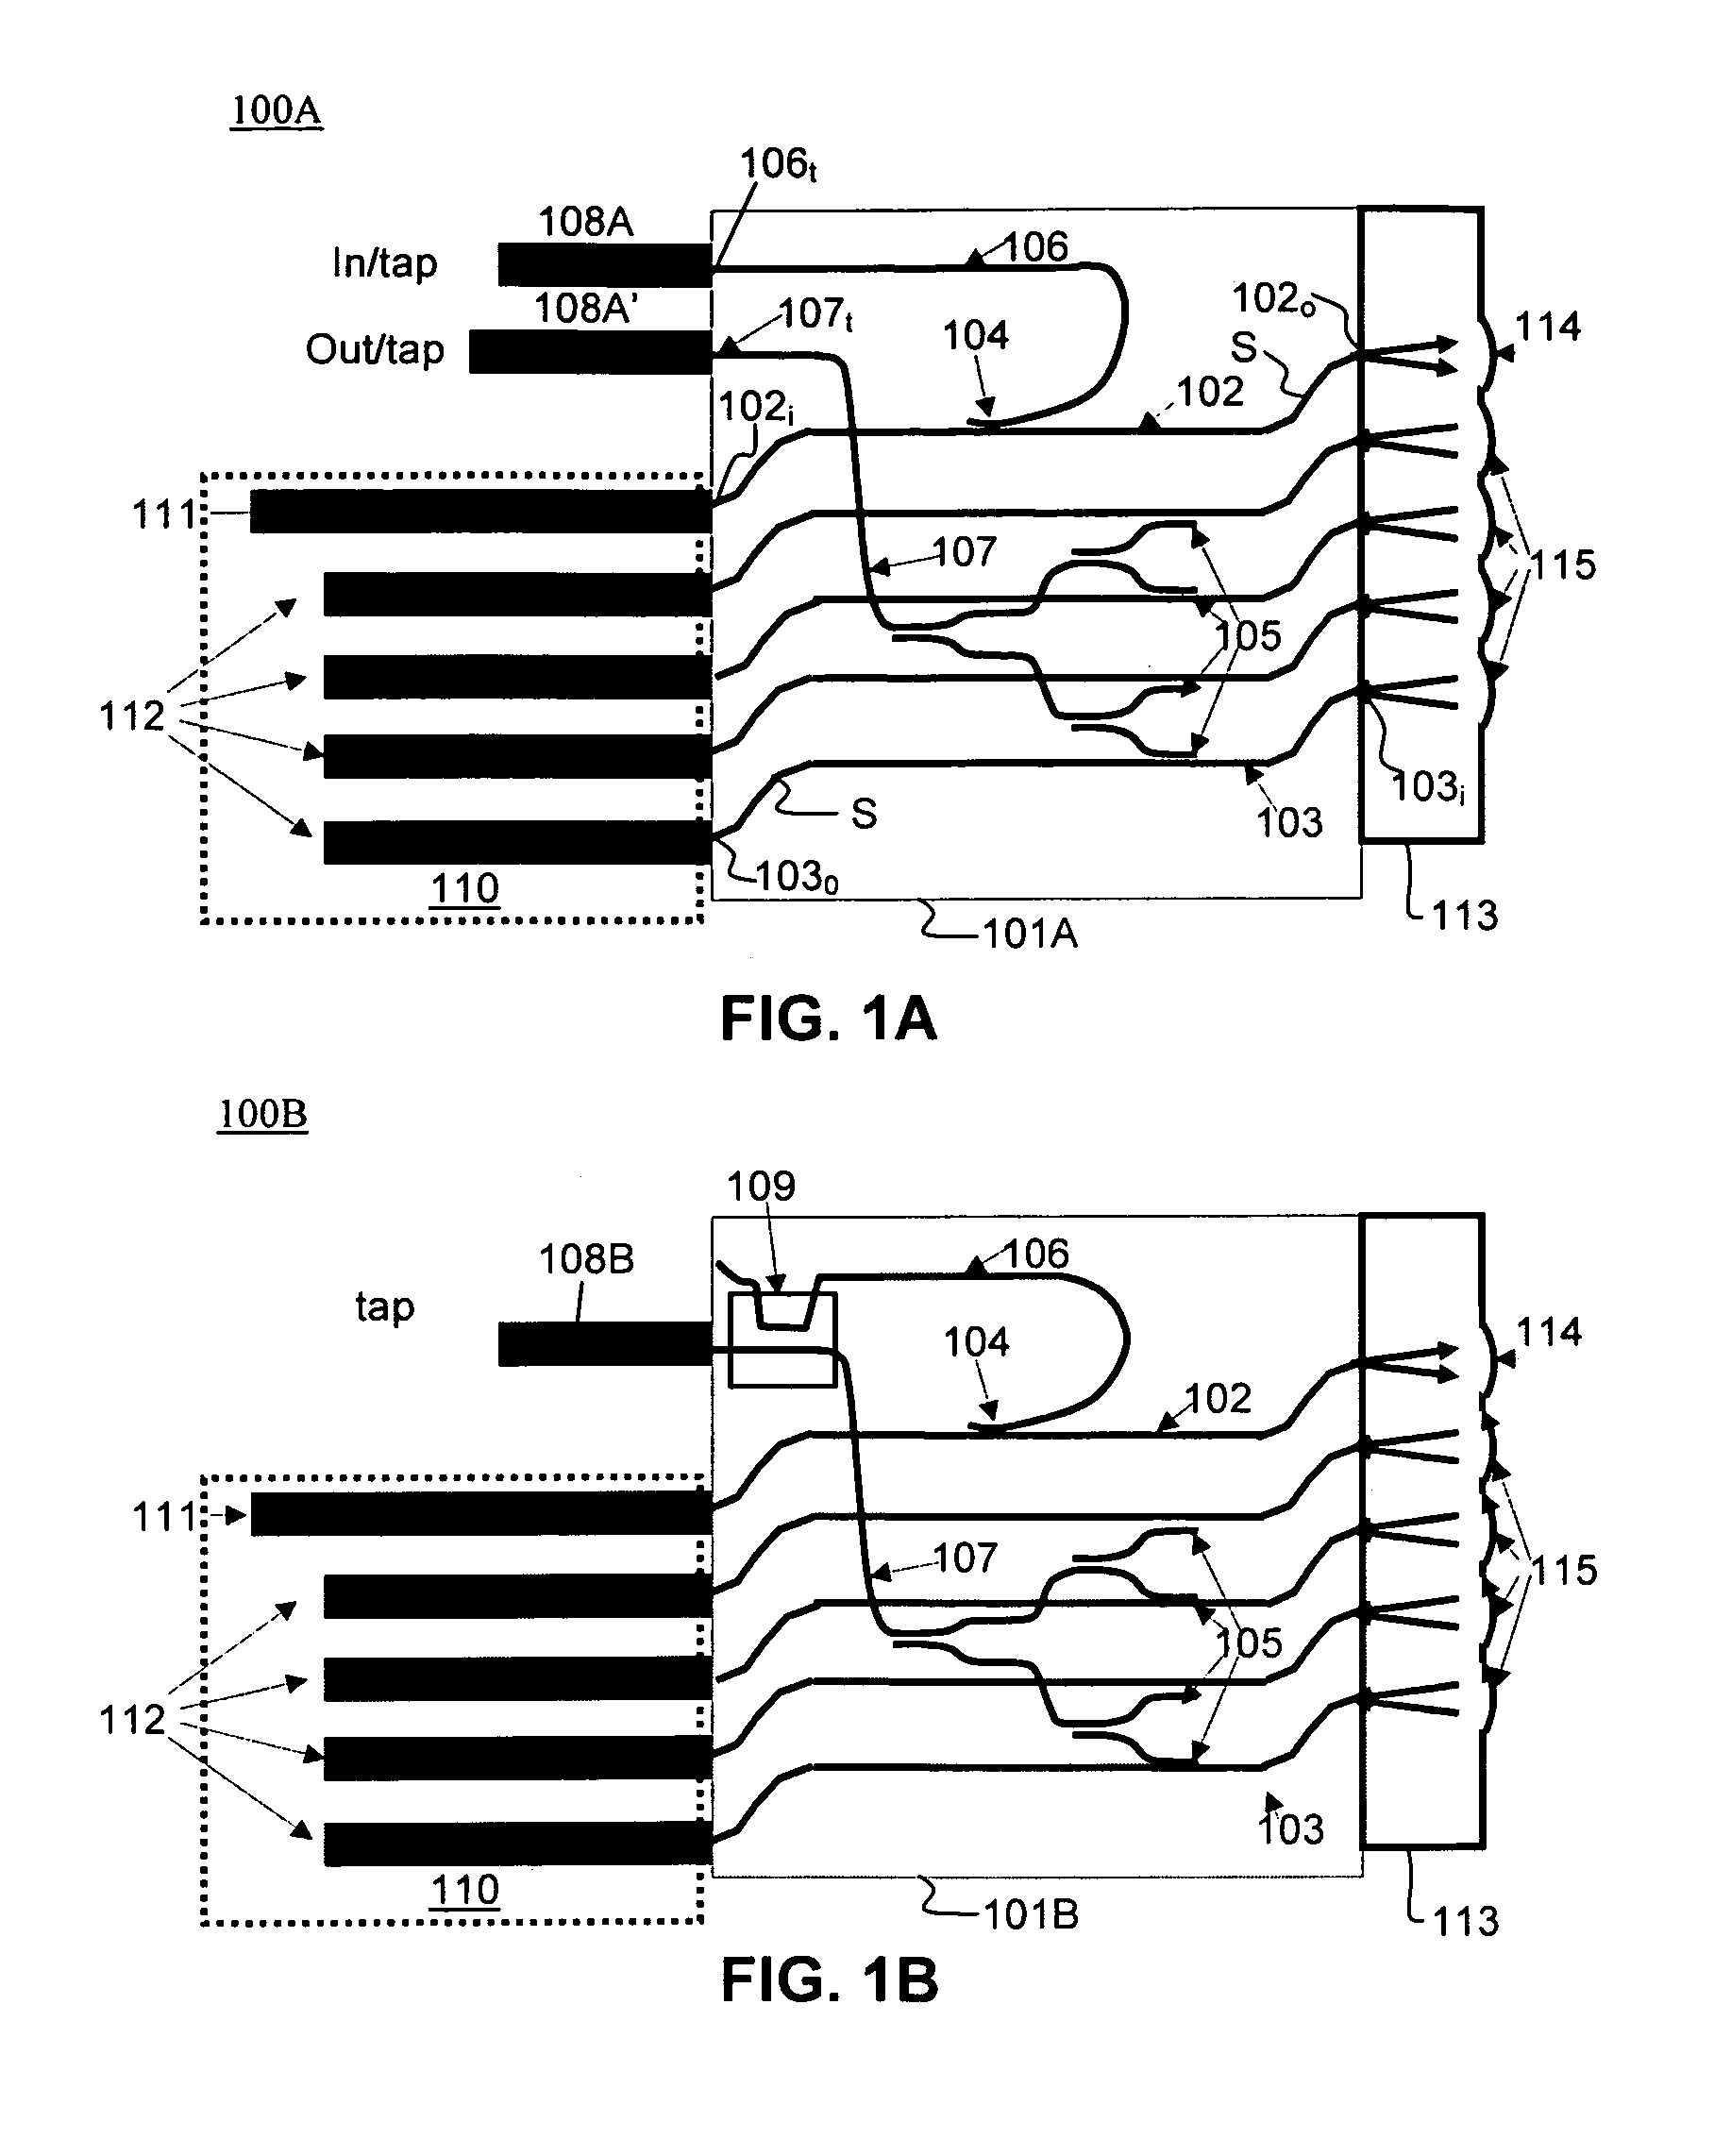 Integrated fiber collimator and passive components